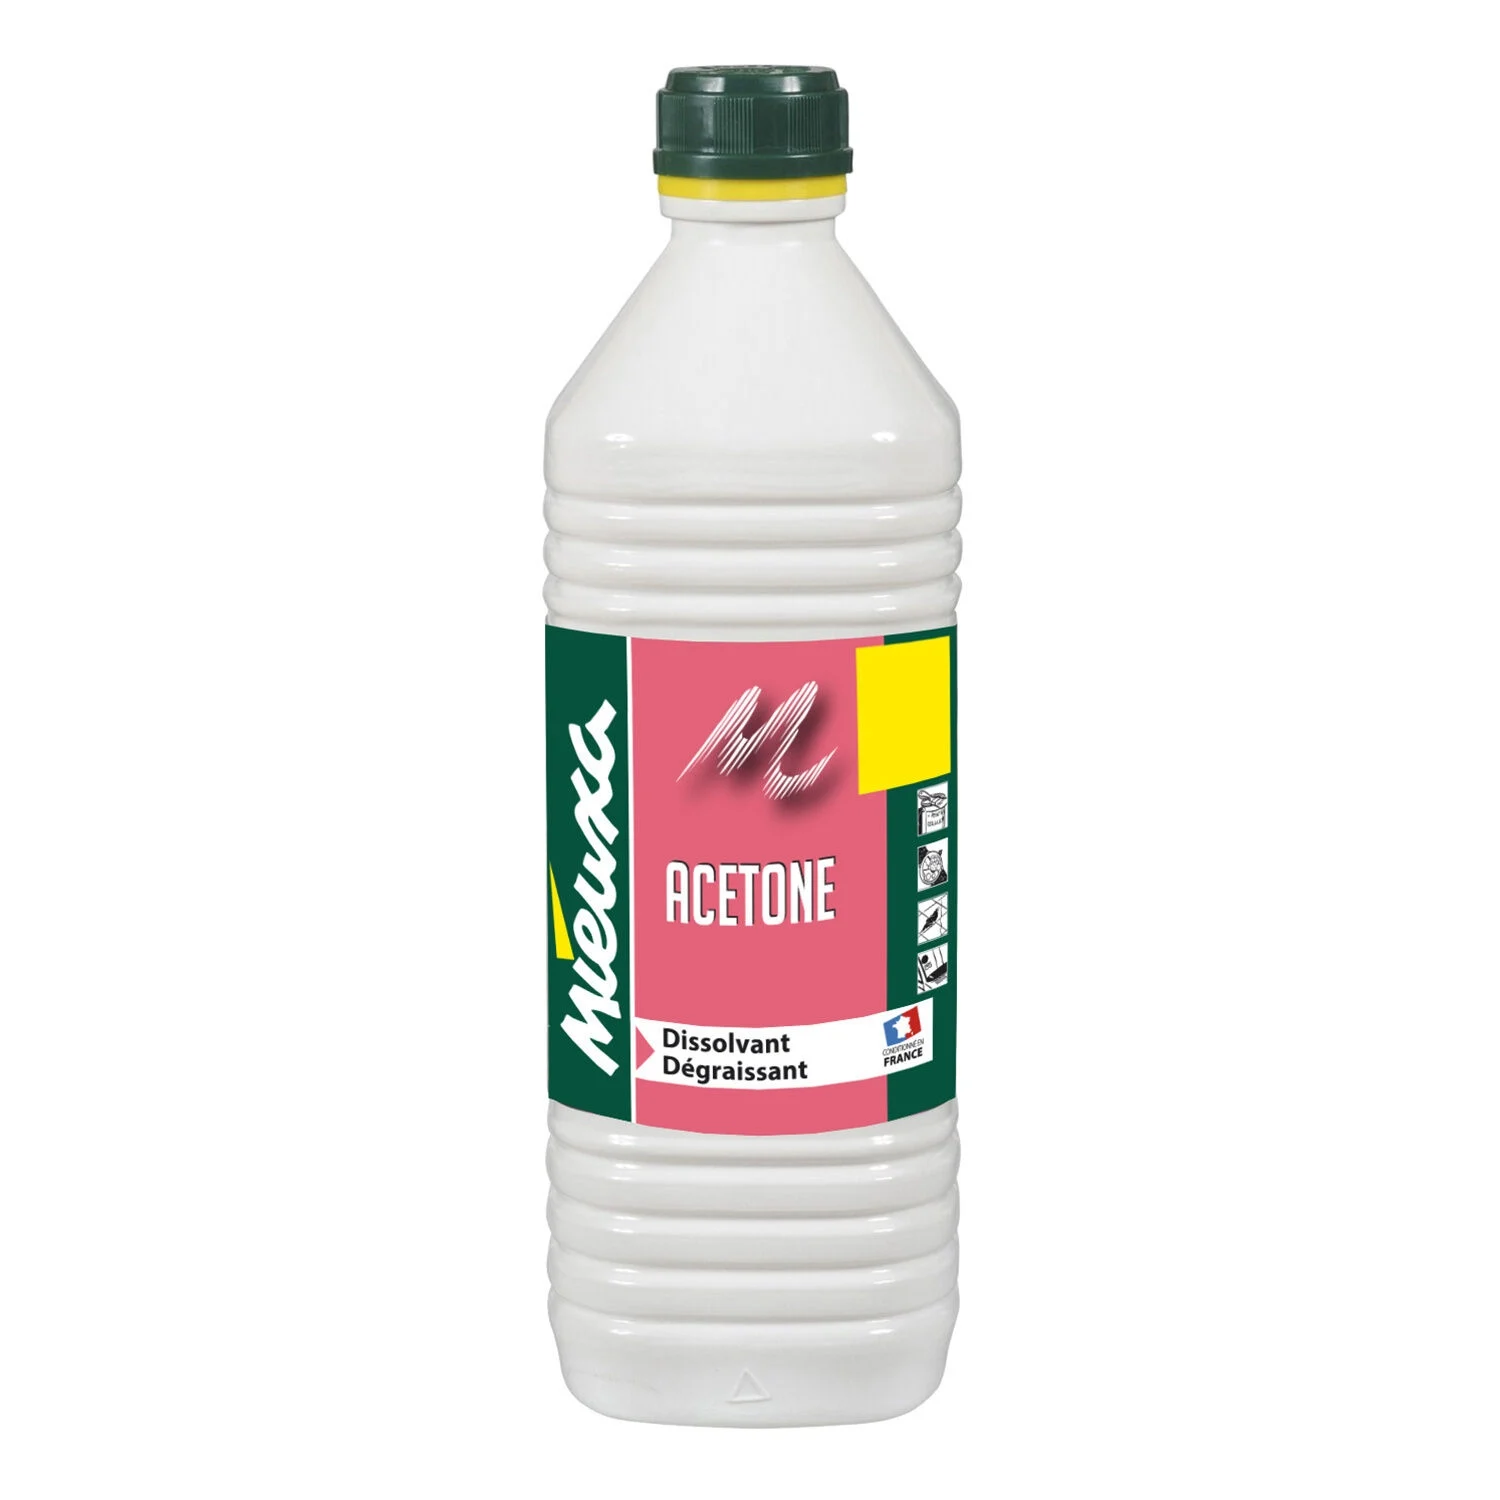 Acetone Solvent, Degreaser 1l - Mieuxa